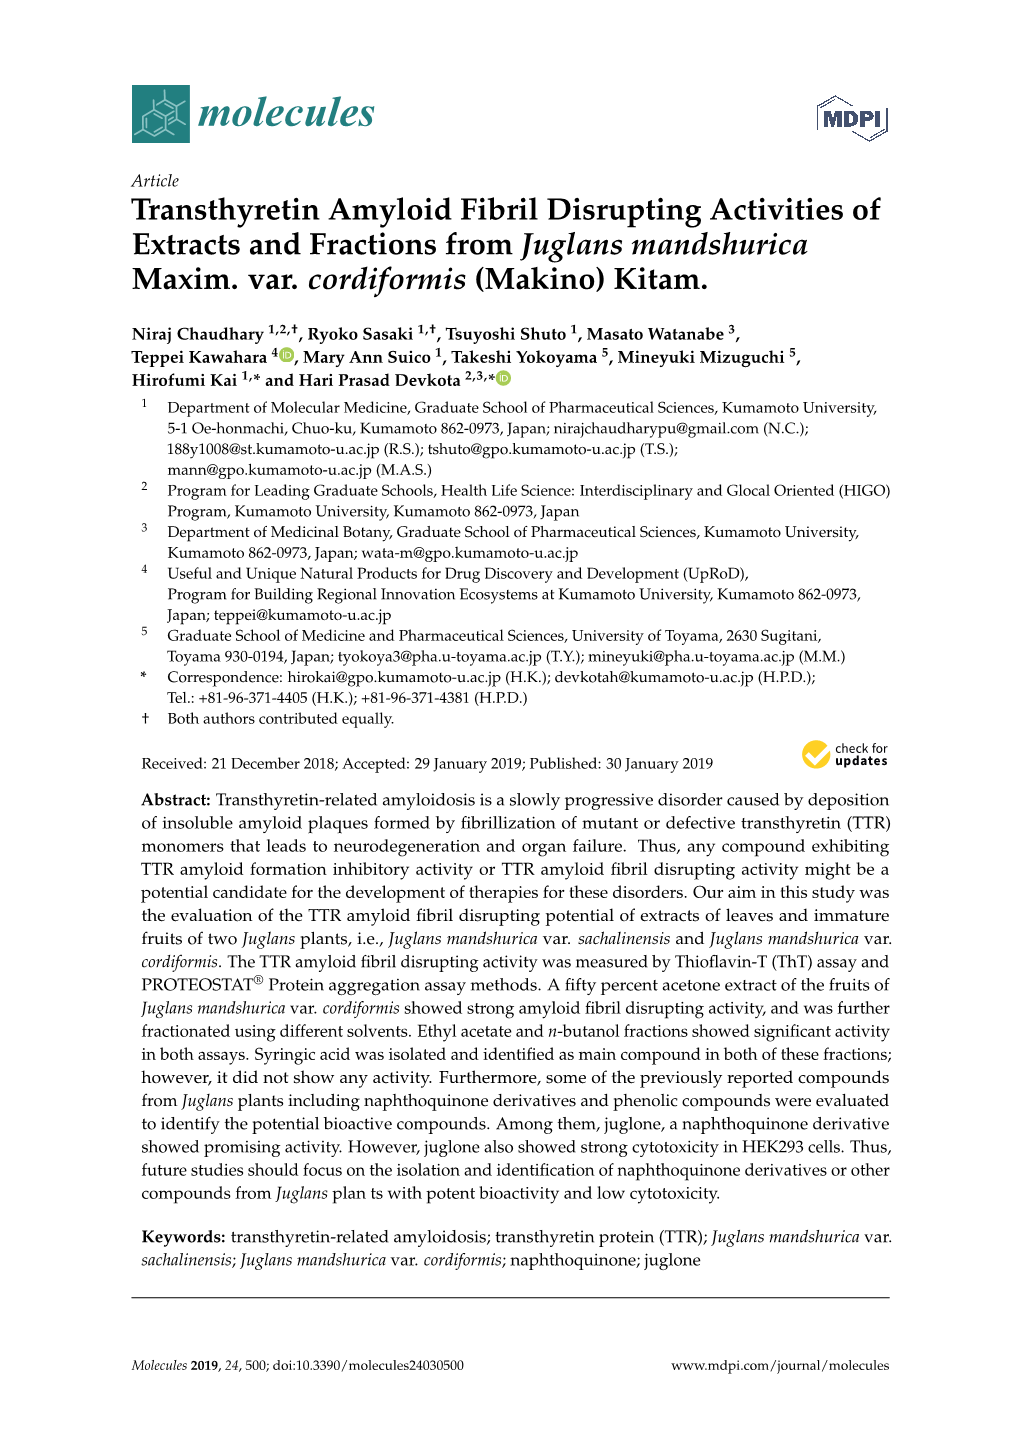 Transthyretin Amyloid Fibril Disrupting Activities of Extracts and Fractions from Juglans Mandshurica Maxim